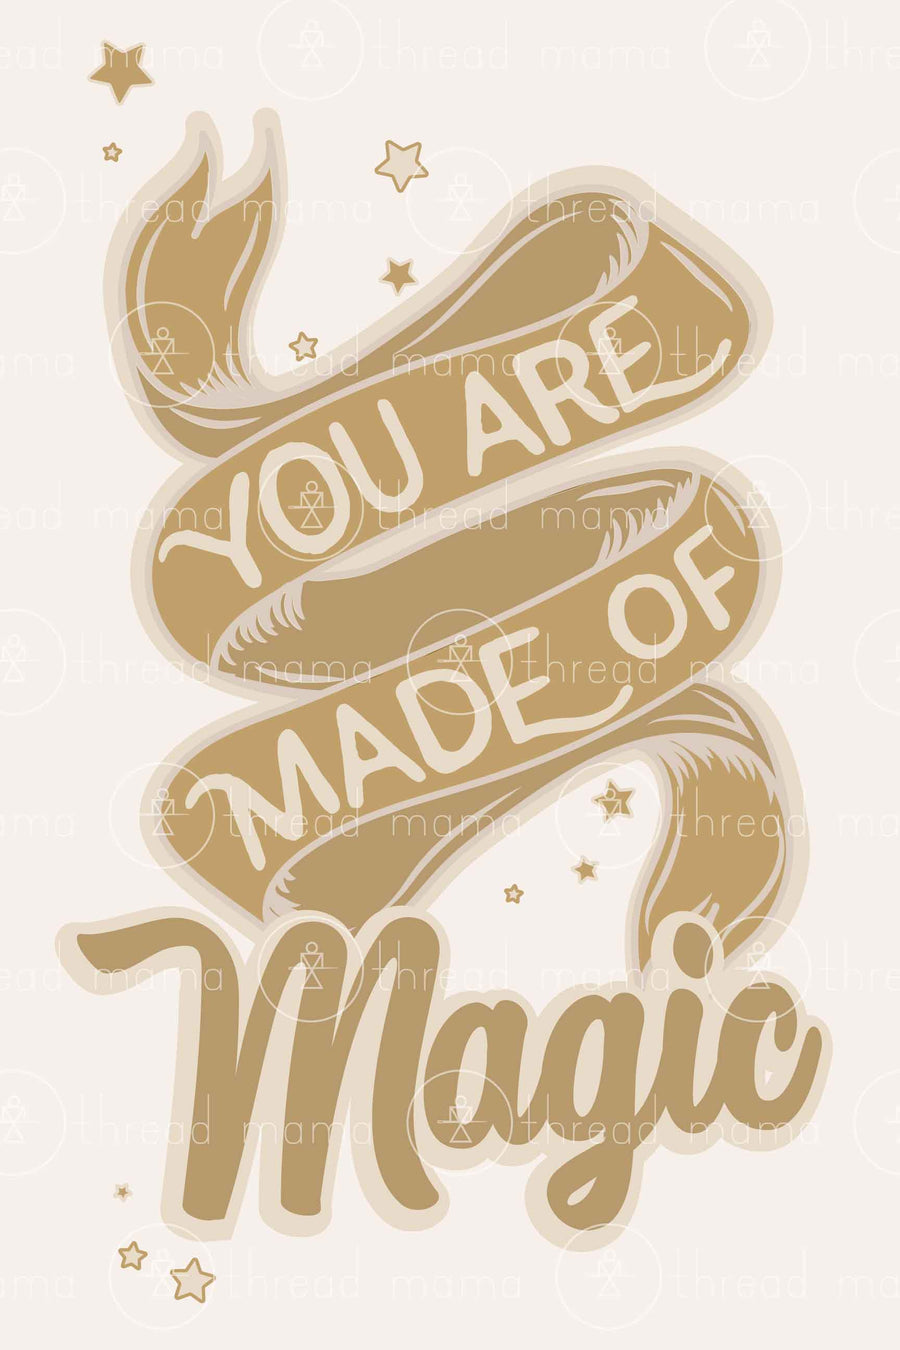 You are made of Magic (Printable Poster)